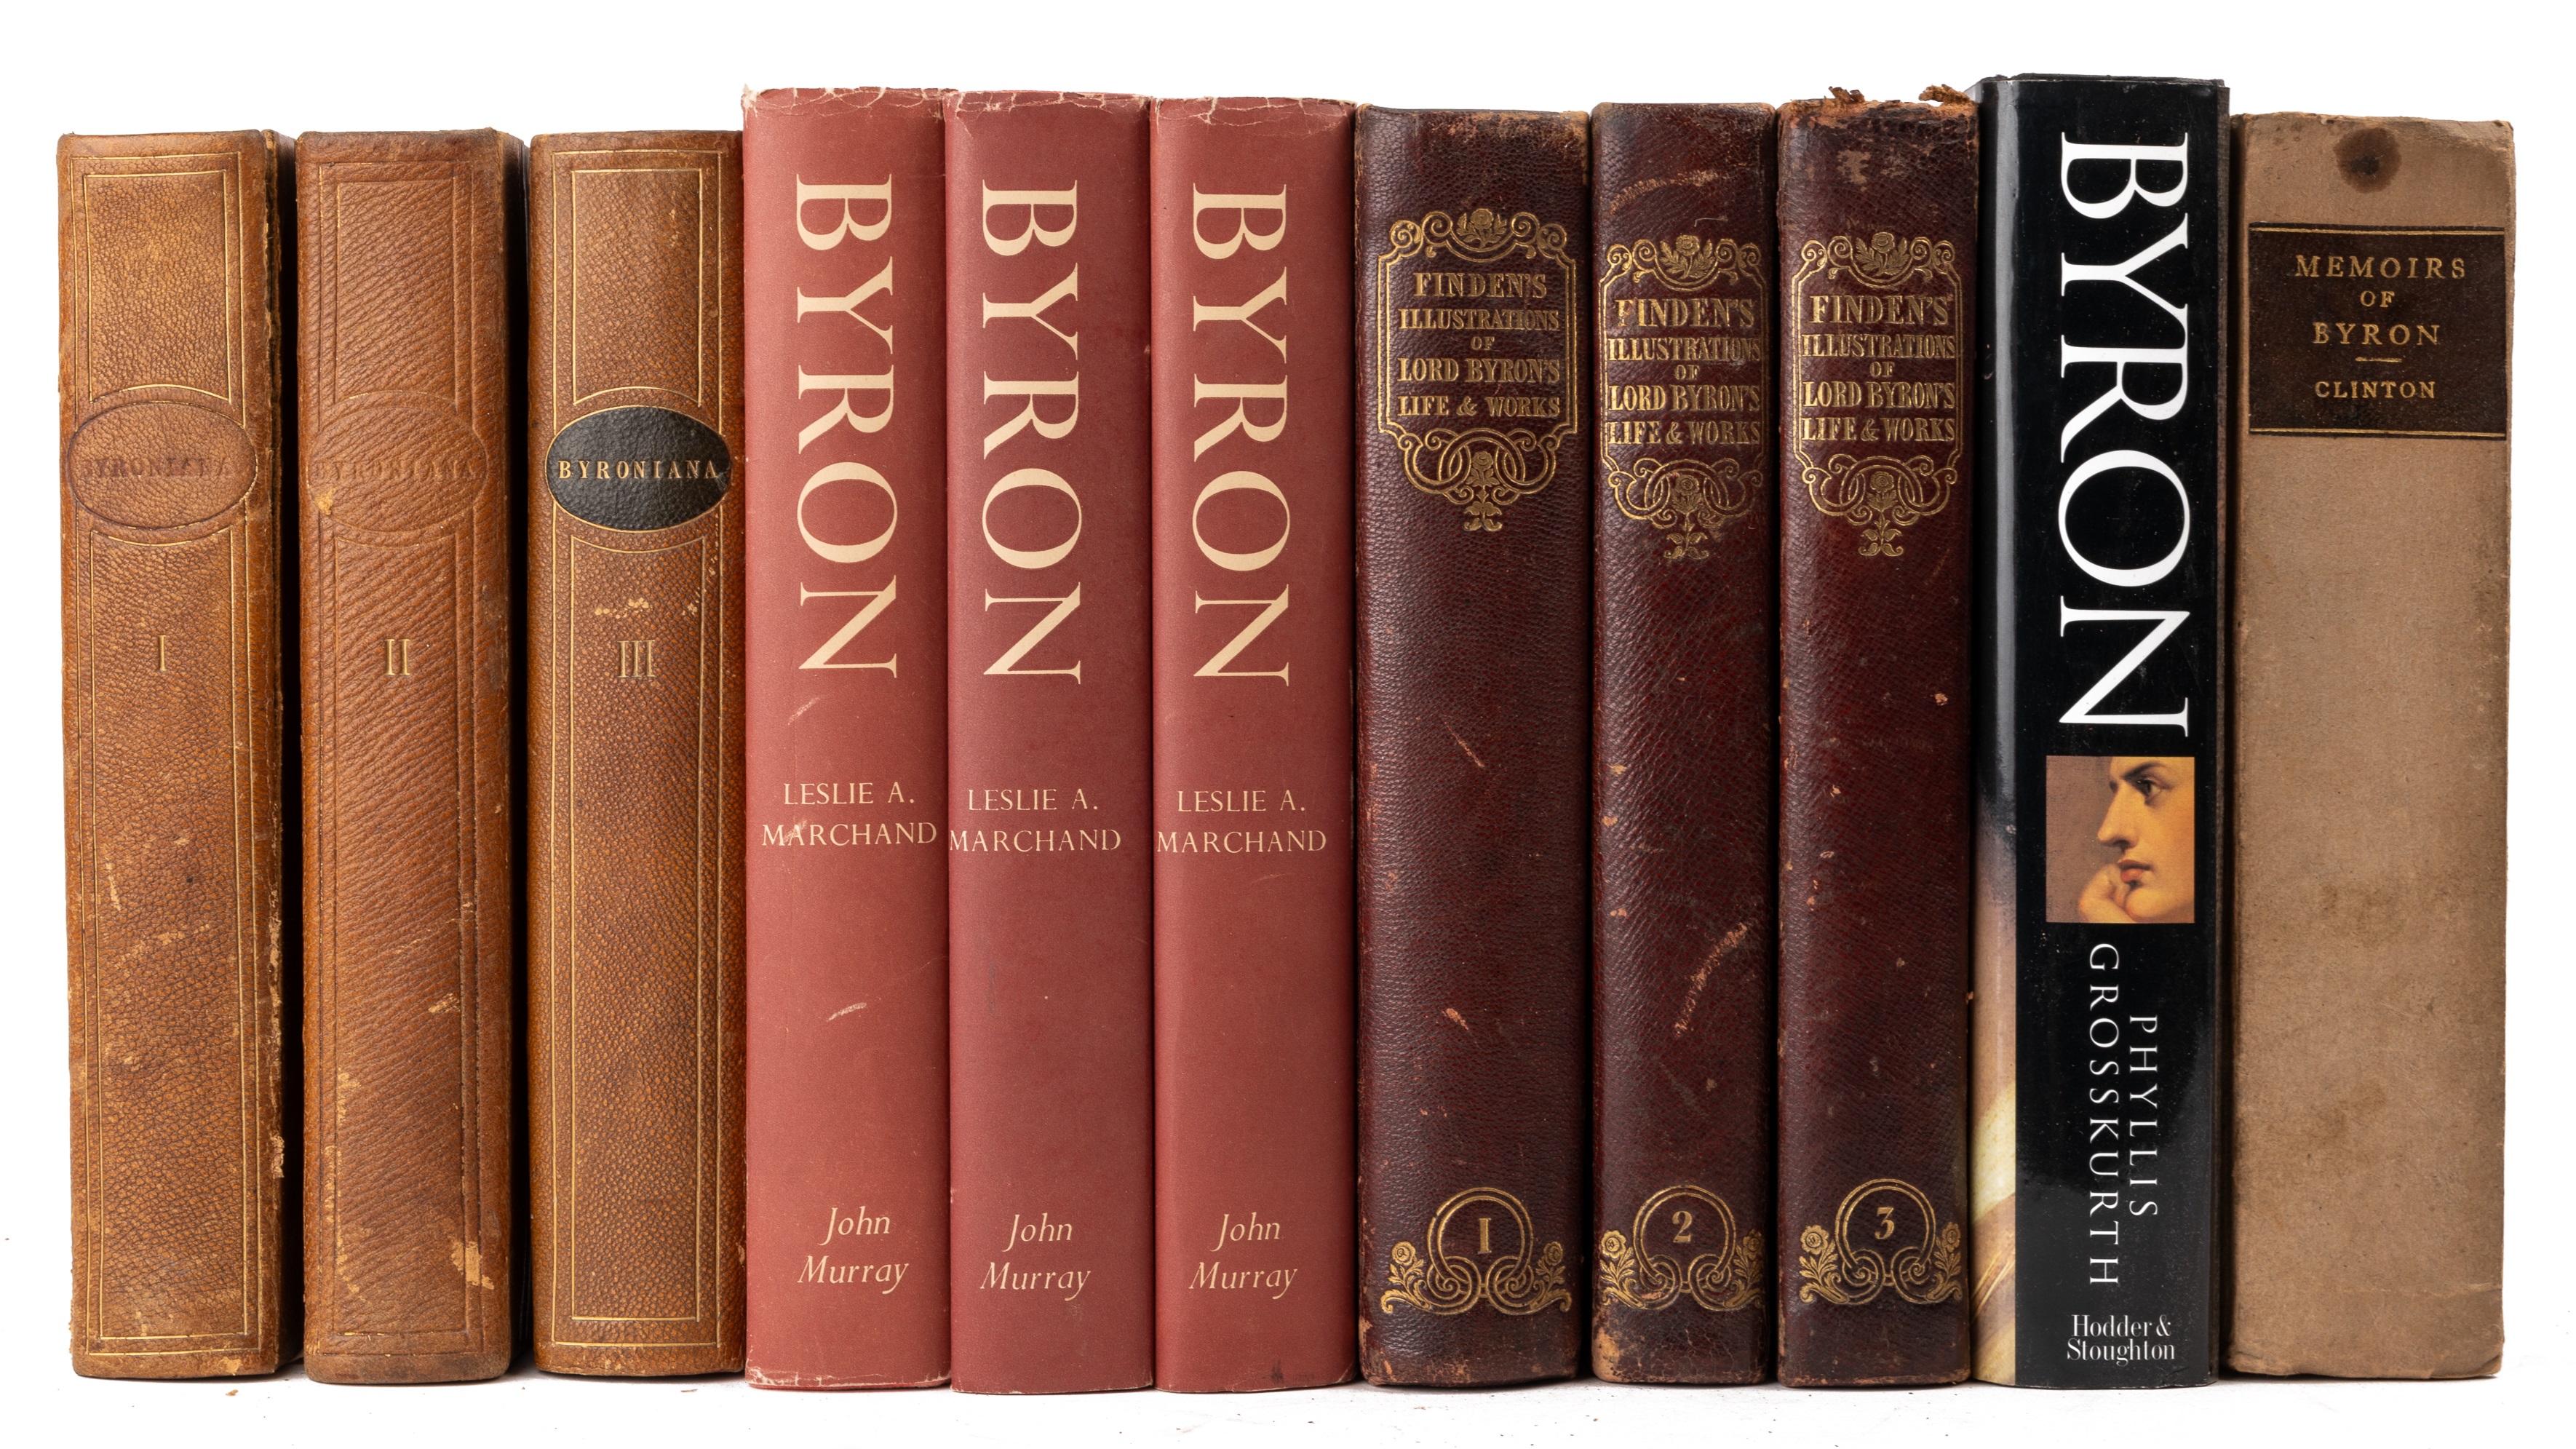 Byron (Lord George) 'Byronia' 3 vols. c1820 with pasted in cutting and illustrations, original